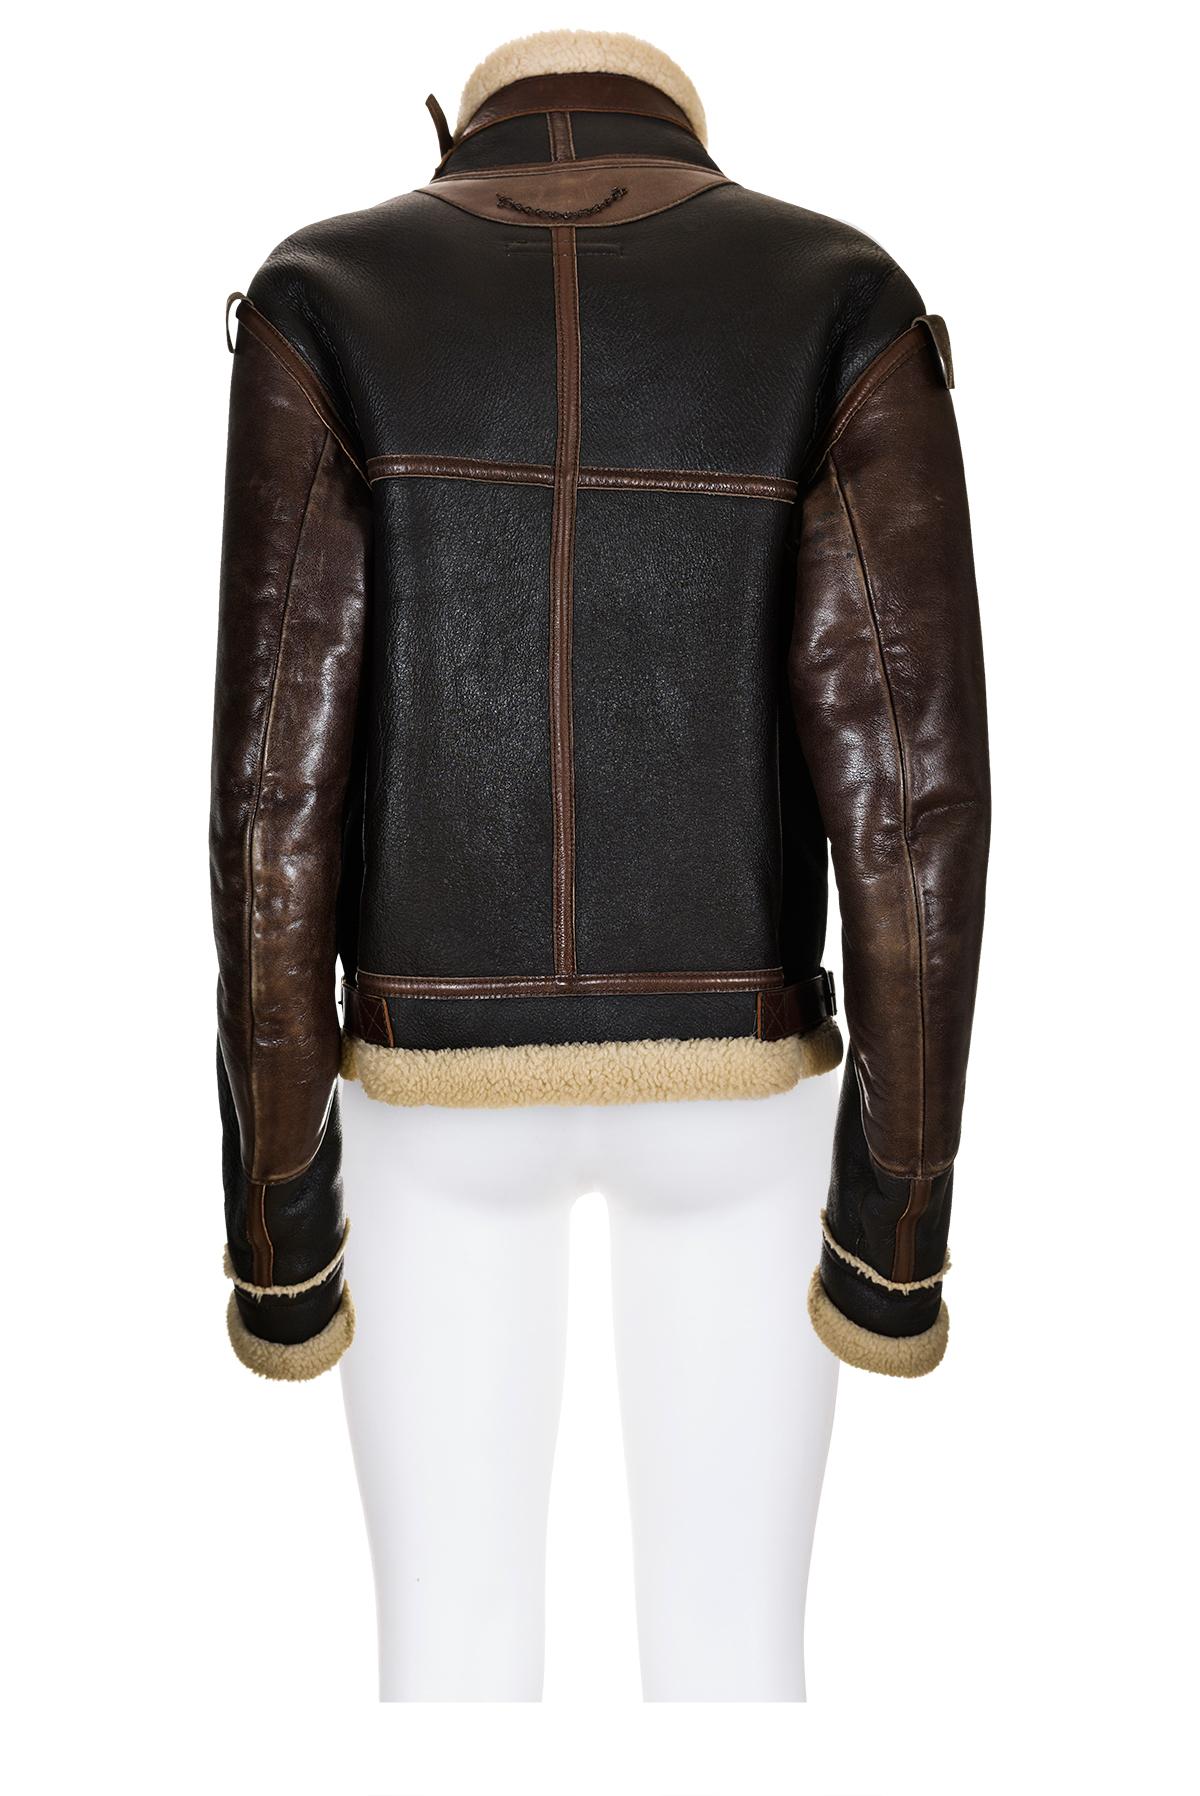 Women's or Men's BALENCIAGA BY NICOLAS GHESQUIÈRE FW 03 Iconic Shearling Aviator Jacket For Sale